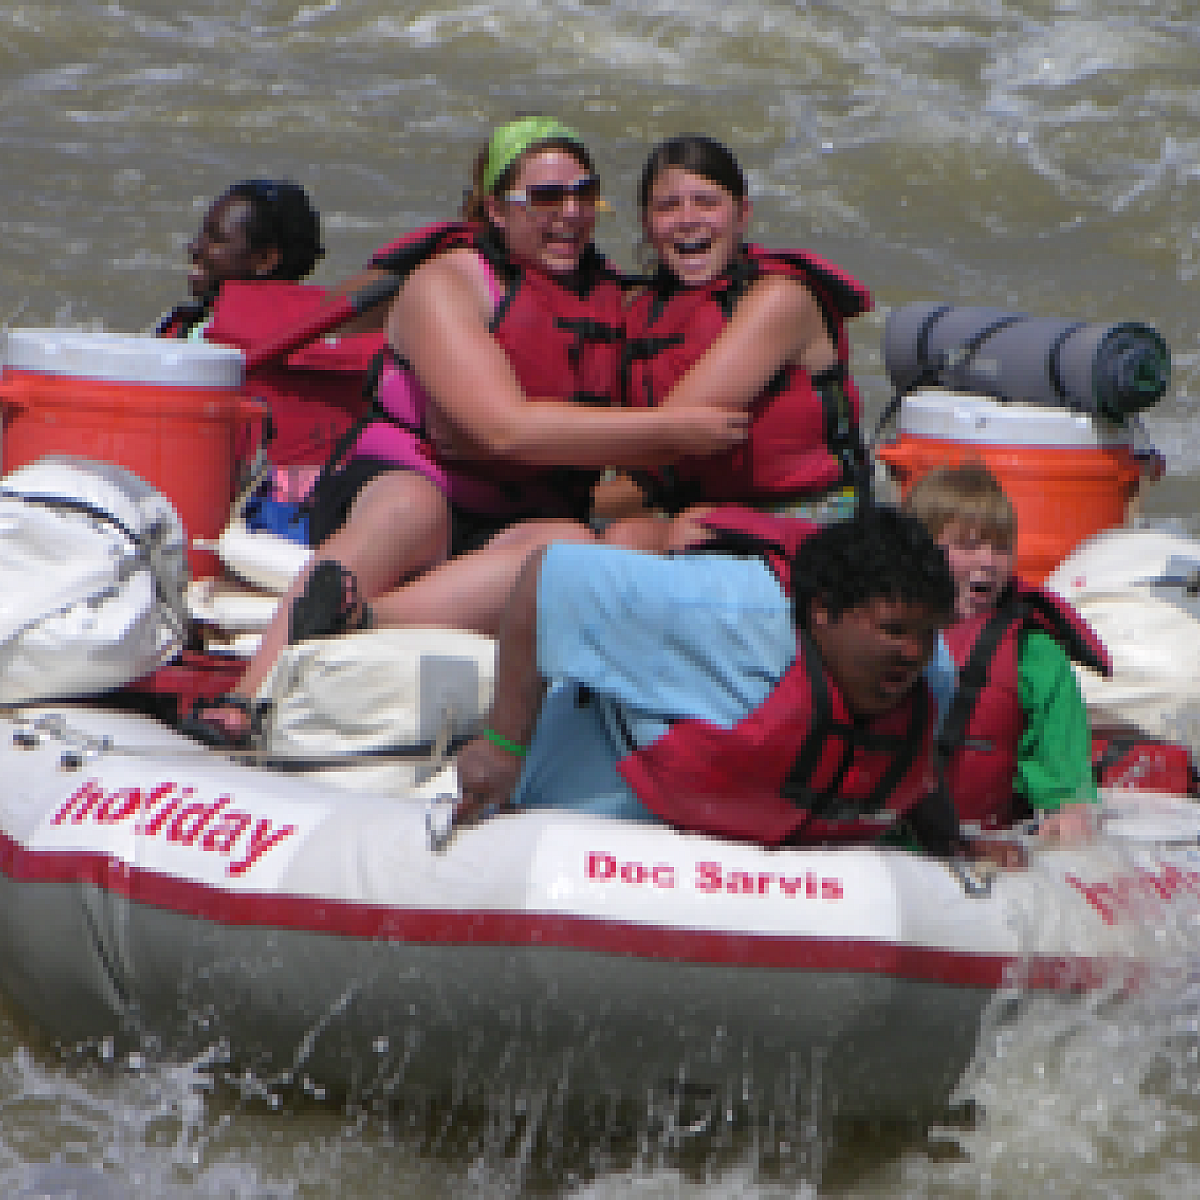 Campers Rafting on the River